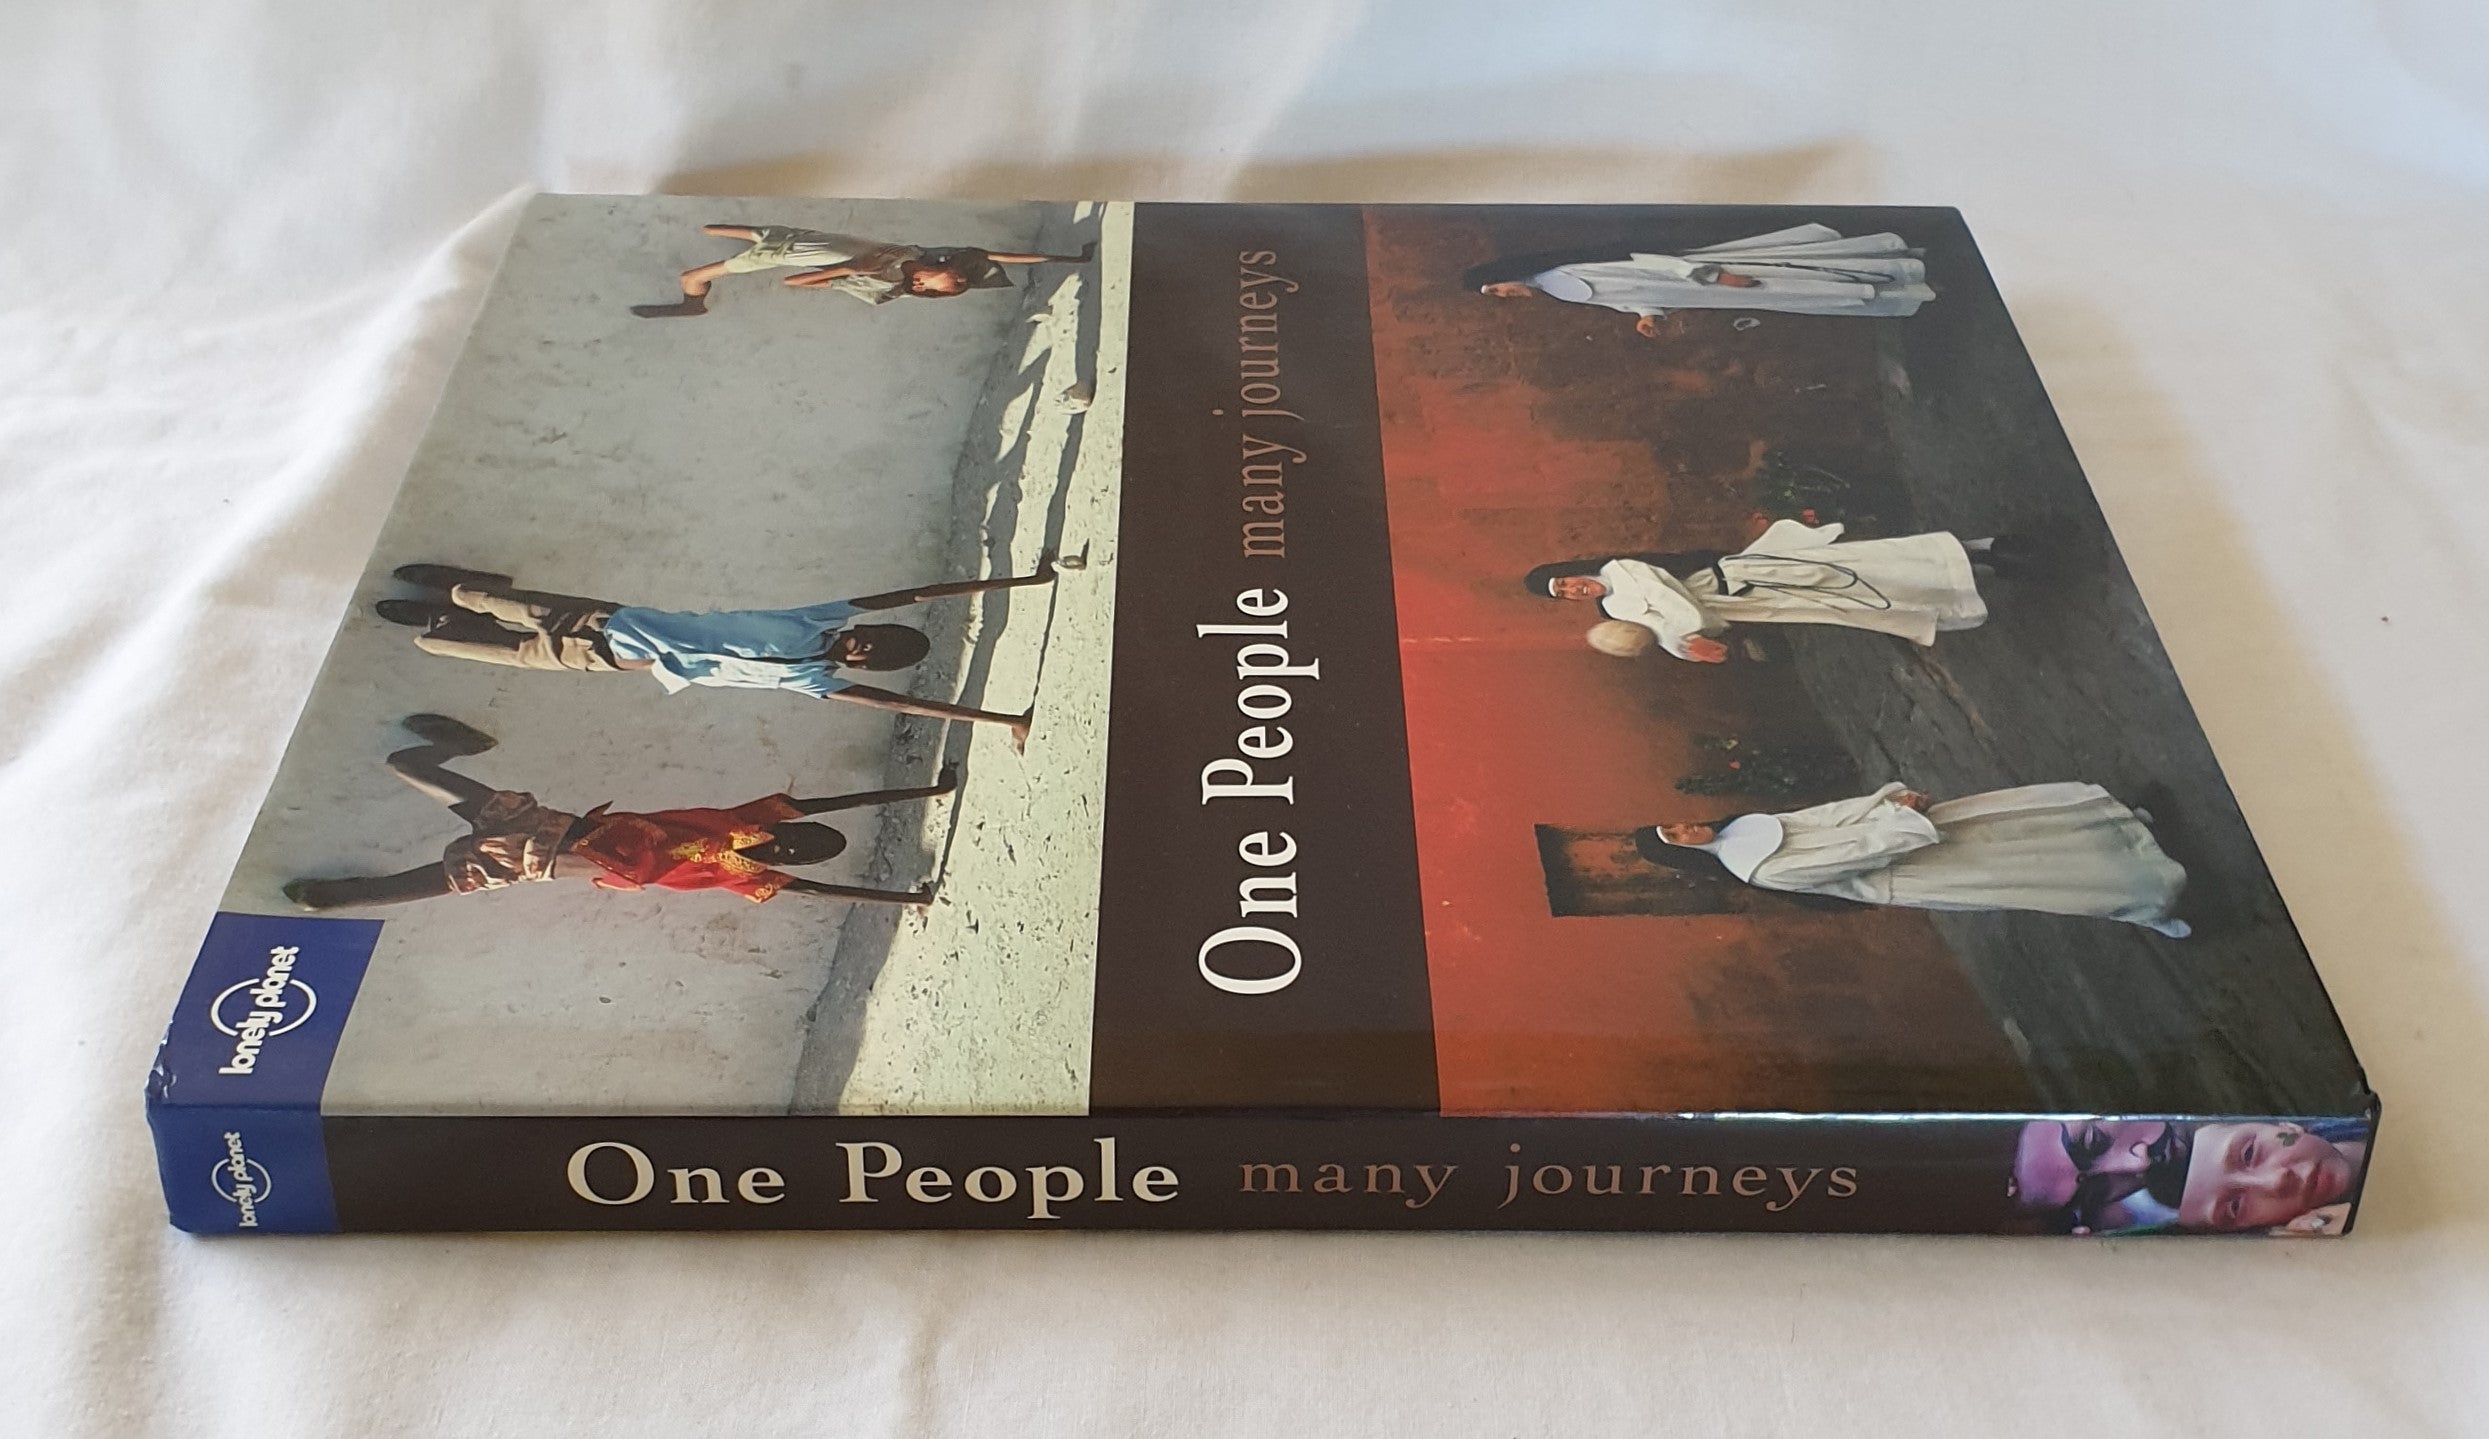 Rare　Many　Morgan's　–　Planet　Publications　Journeys　Lonely　People　One　Books